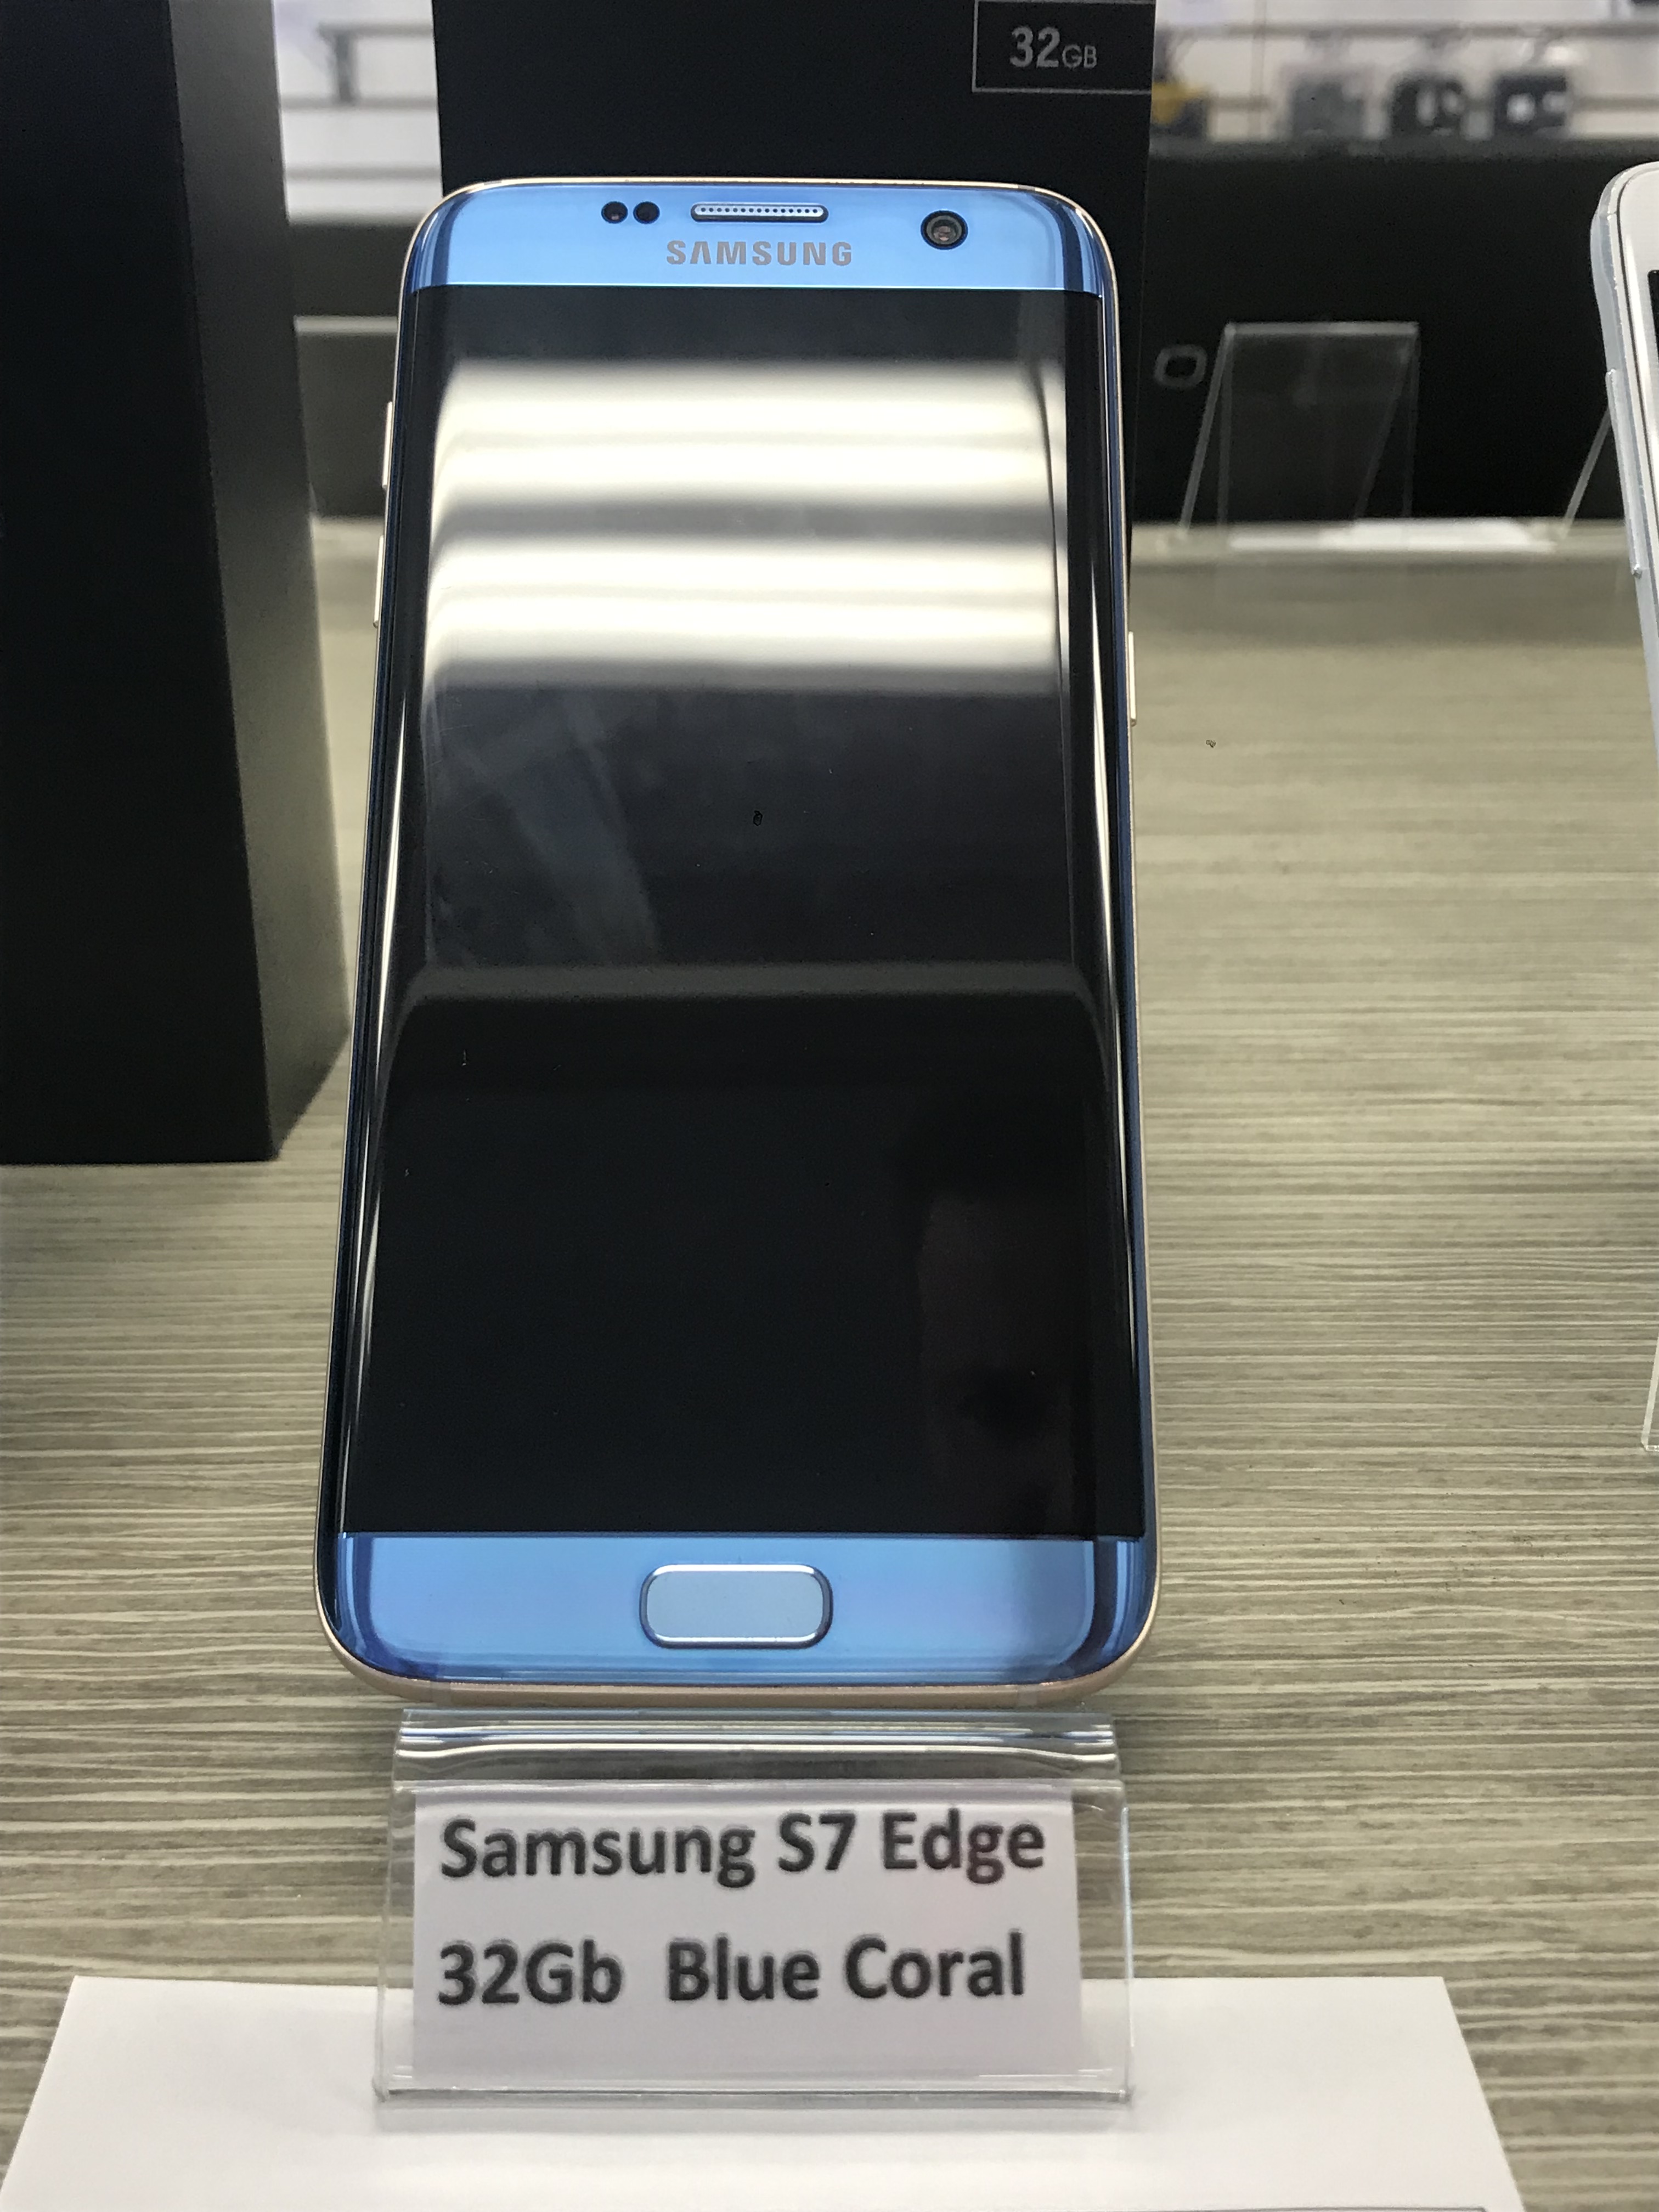 Samsung S7 Edge 32Gb Blue Coral for sale